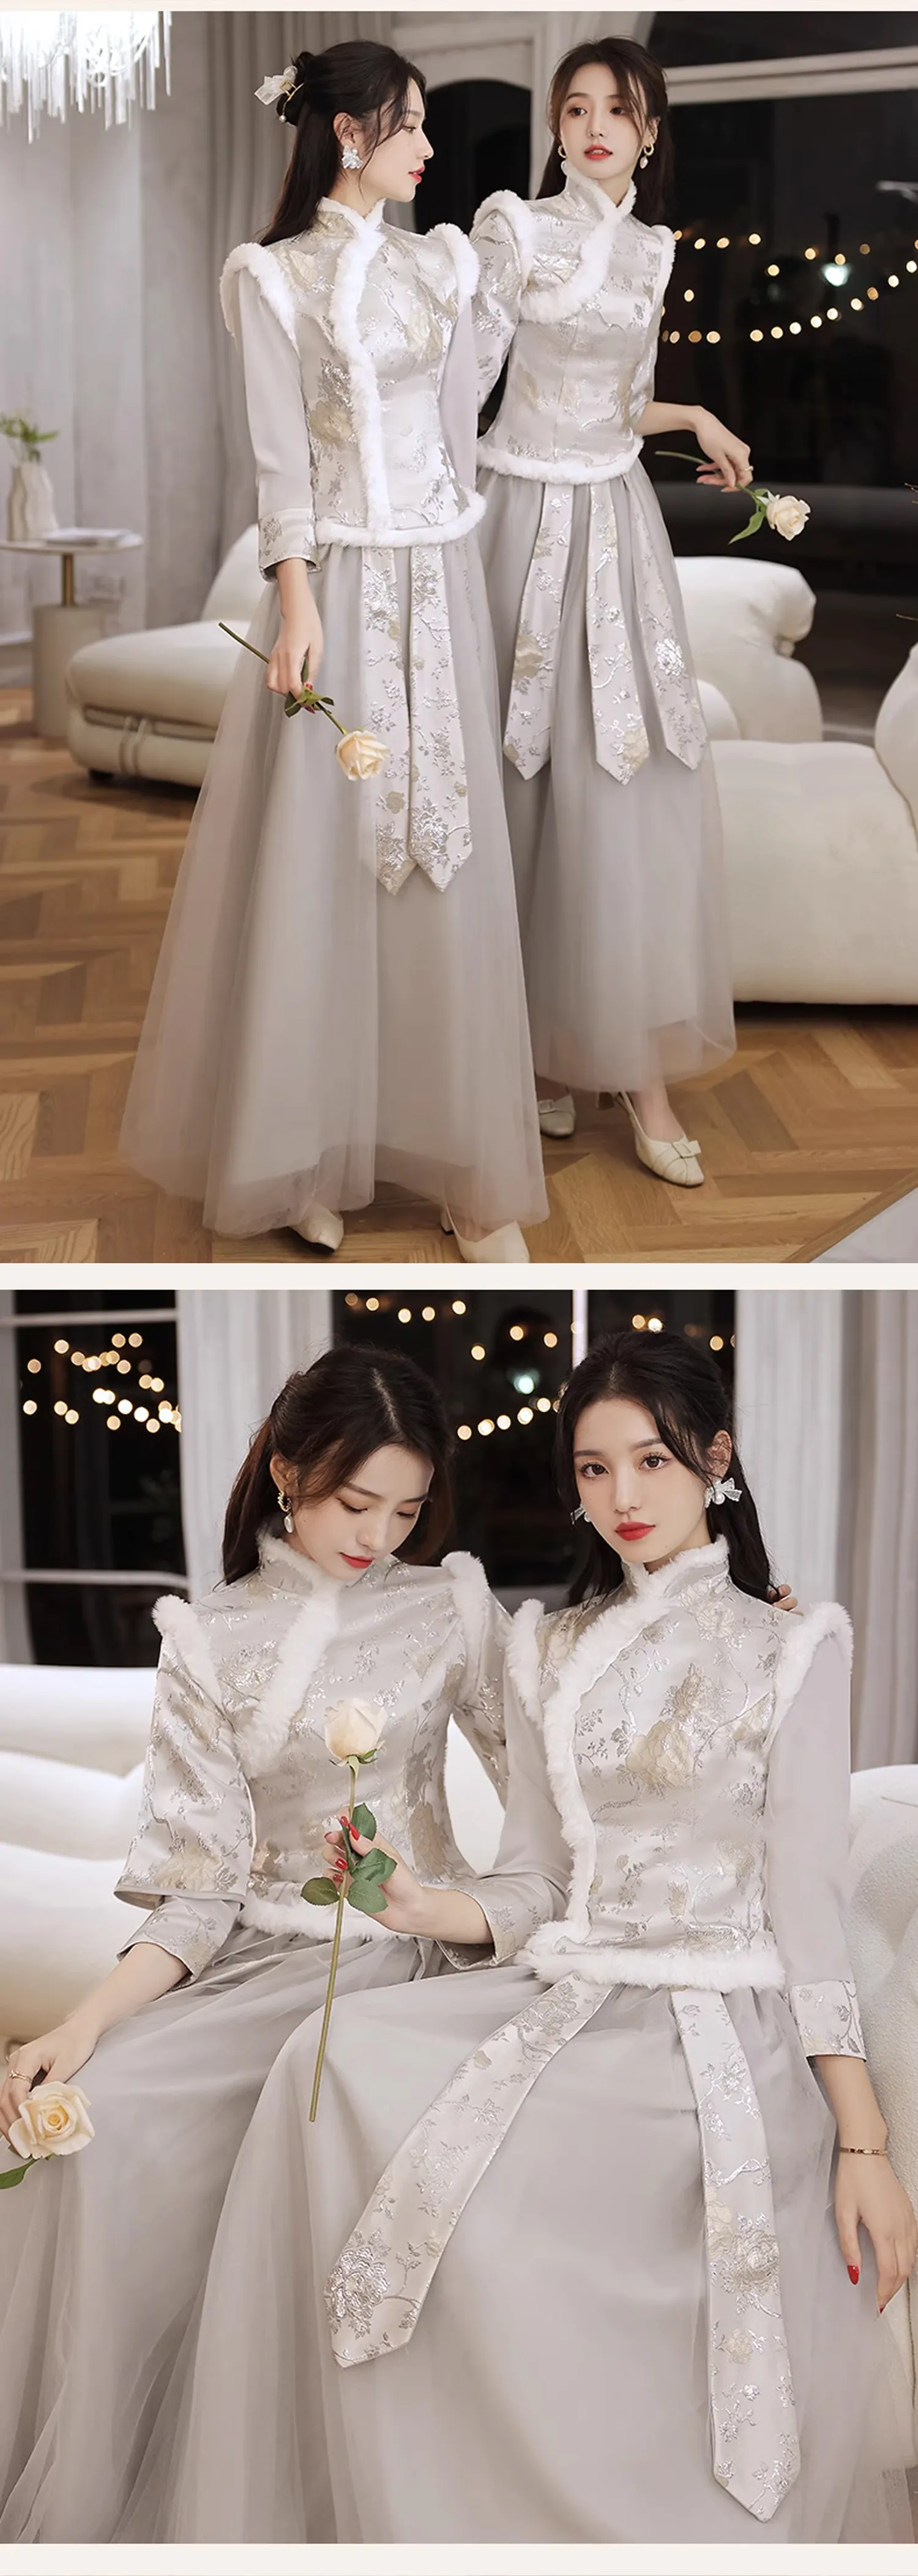 Chic-Chinese-Style-Long-Sleeve-Bride-Wedding-Party-Bridesmaid-Dress12